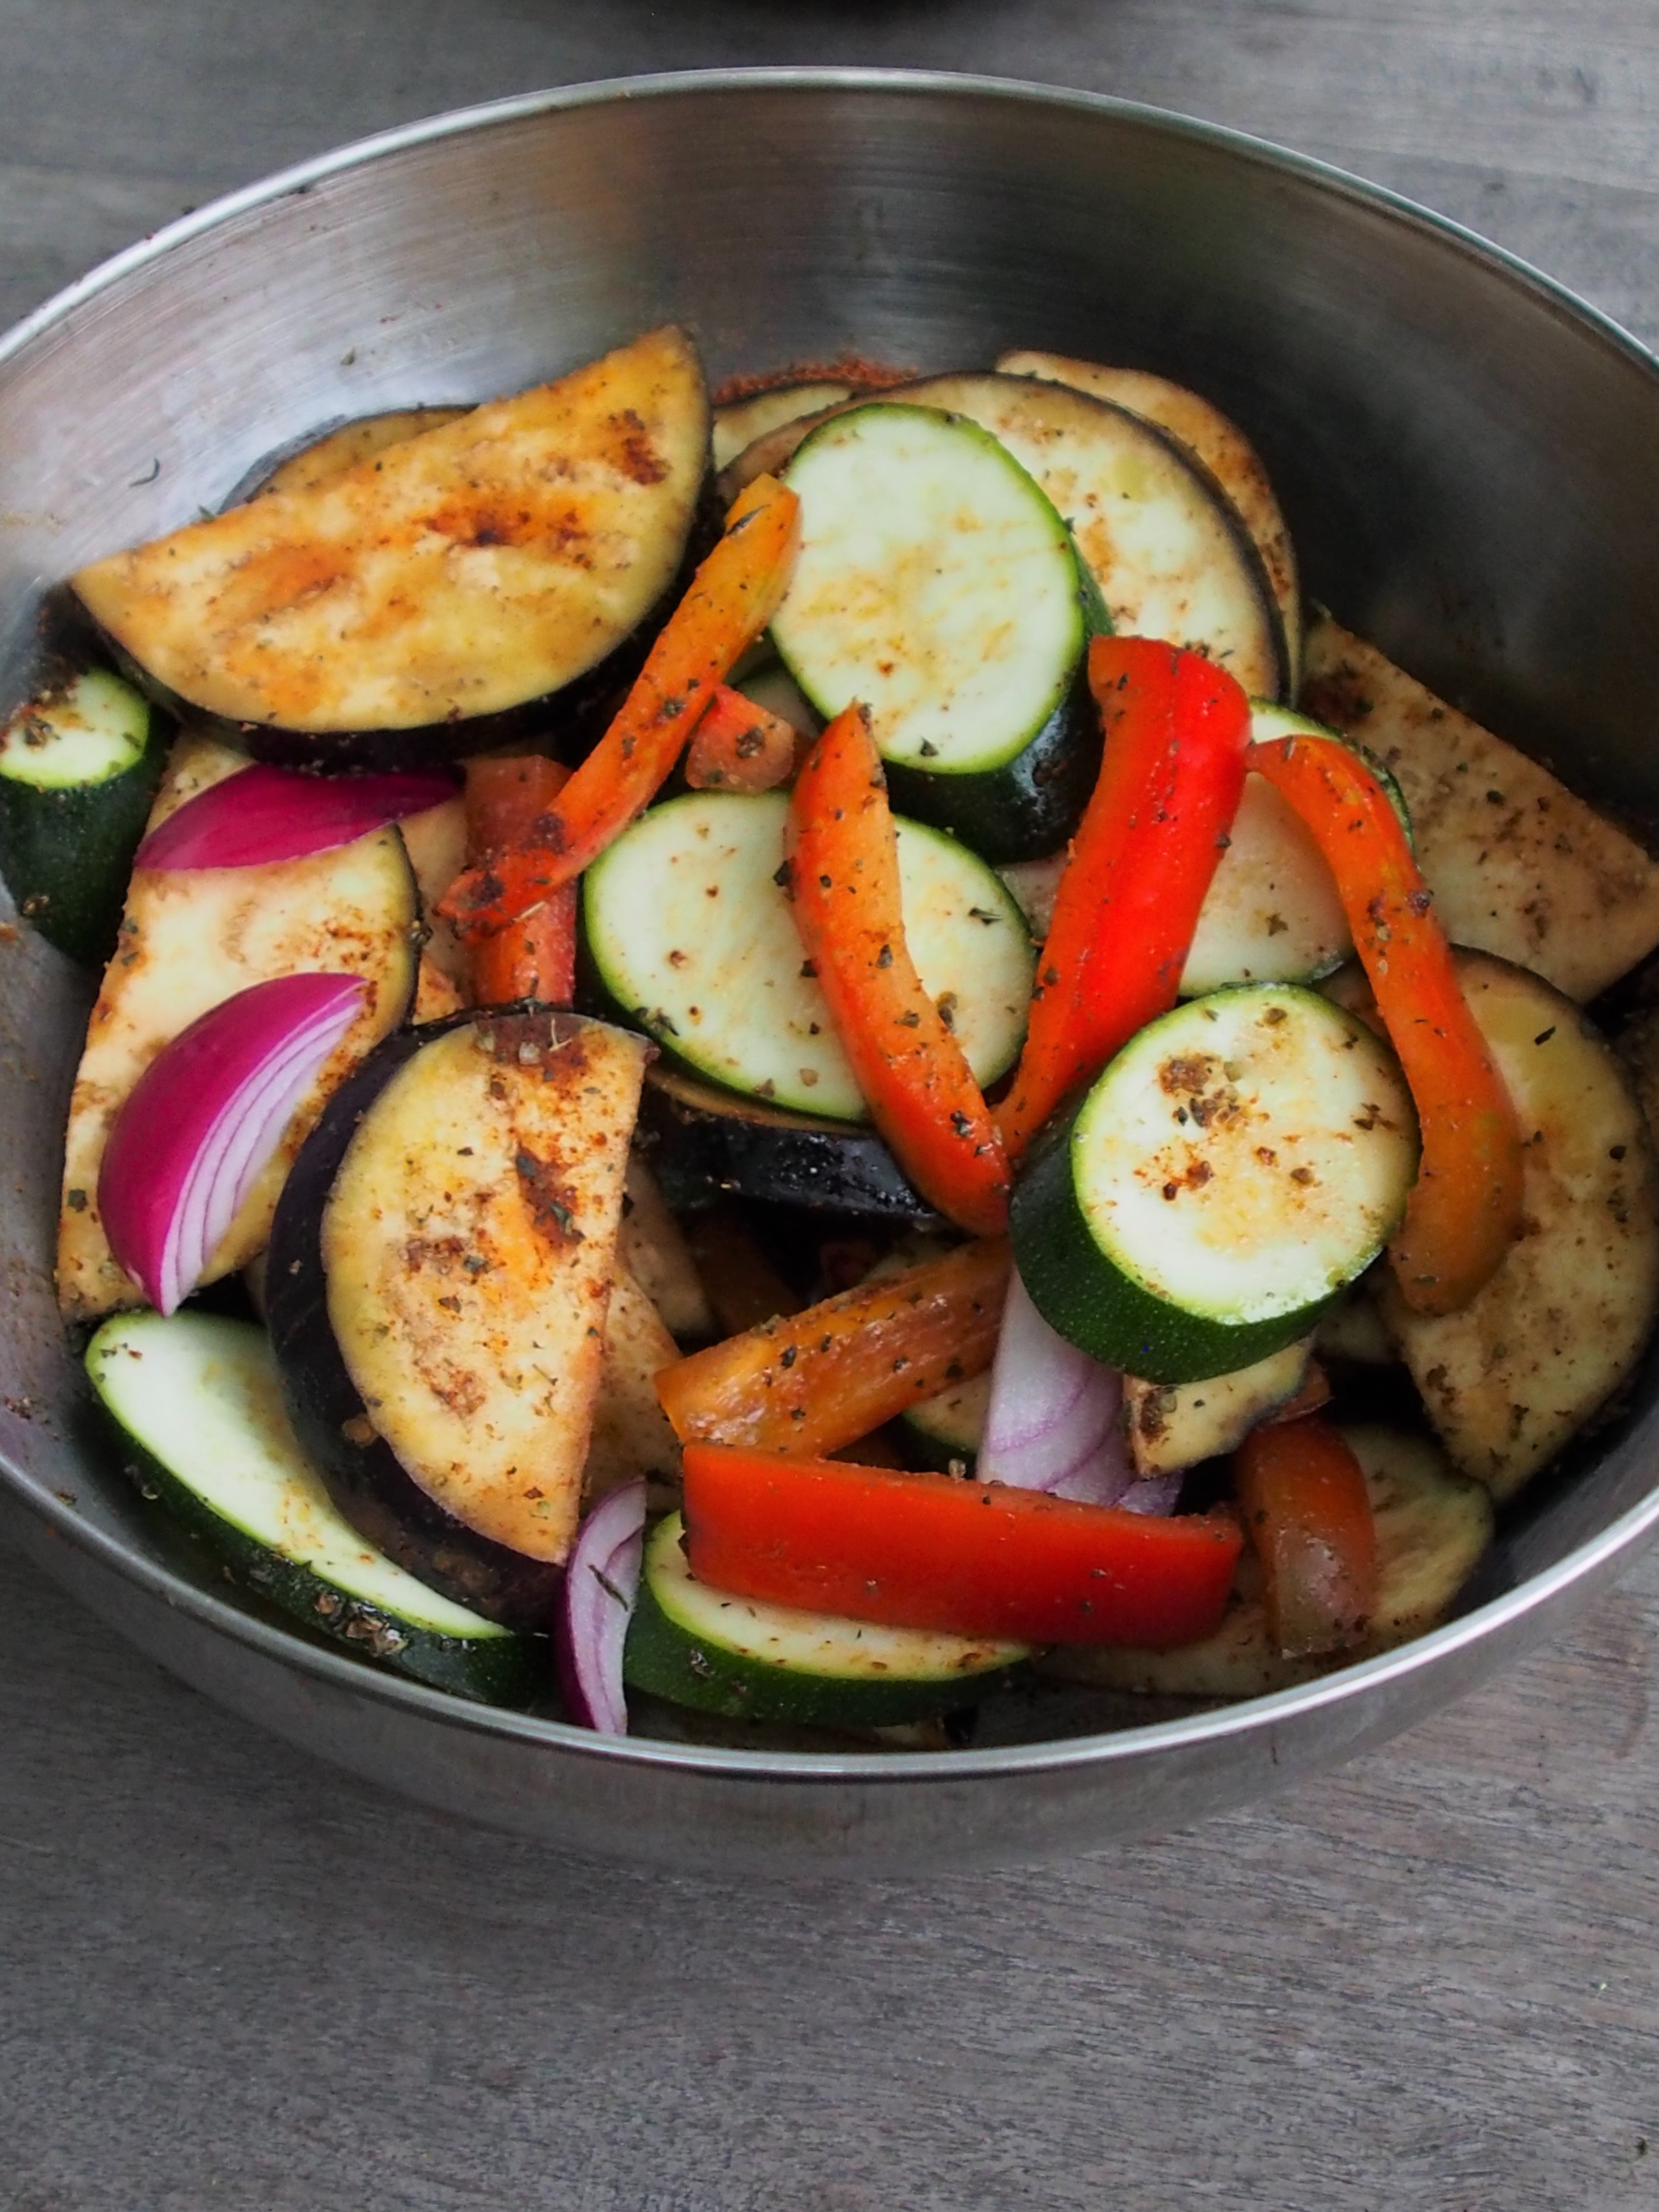 veggies sprinkled with delicious herbs and spices!